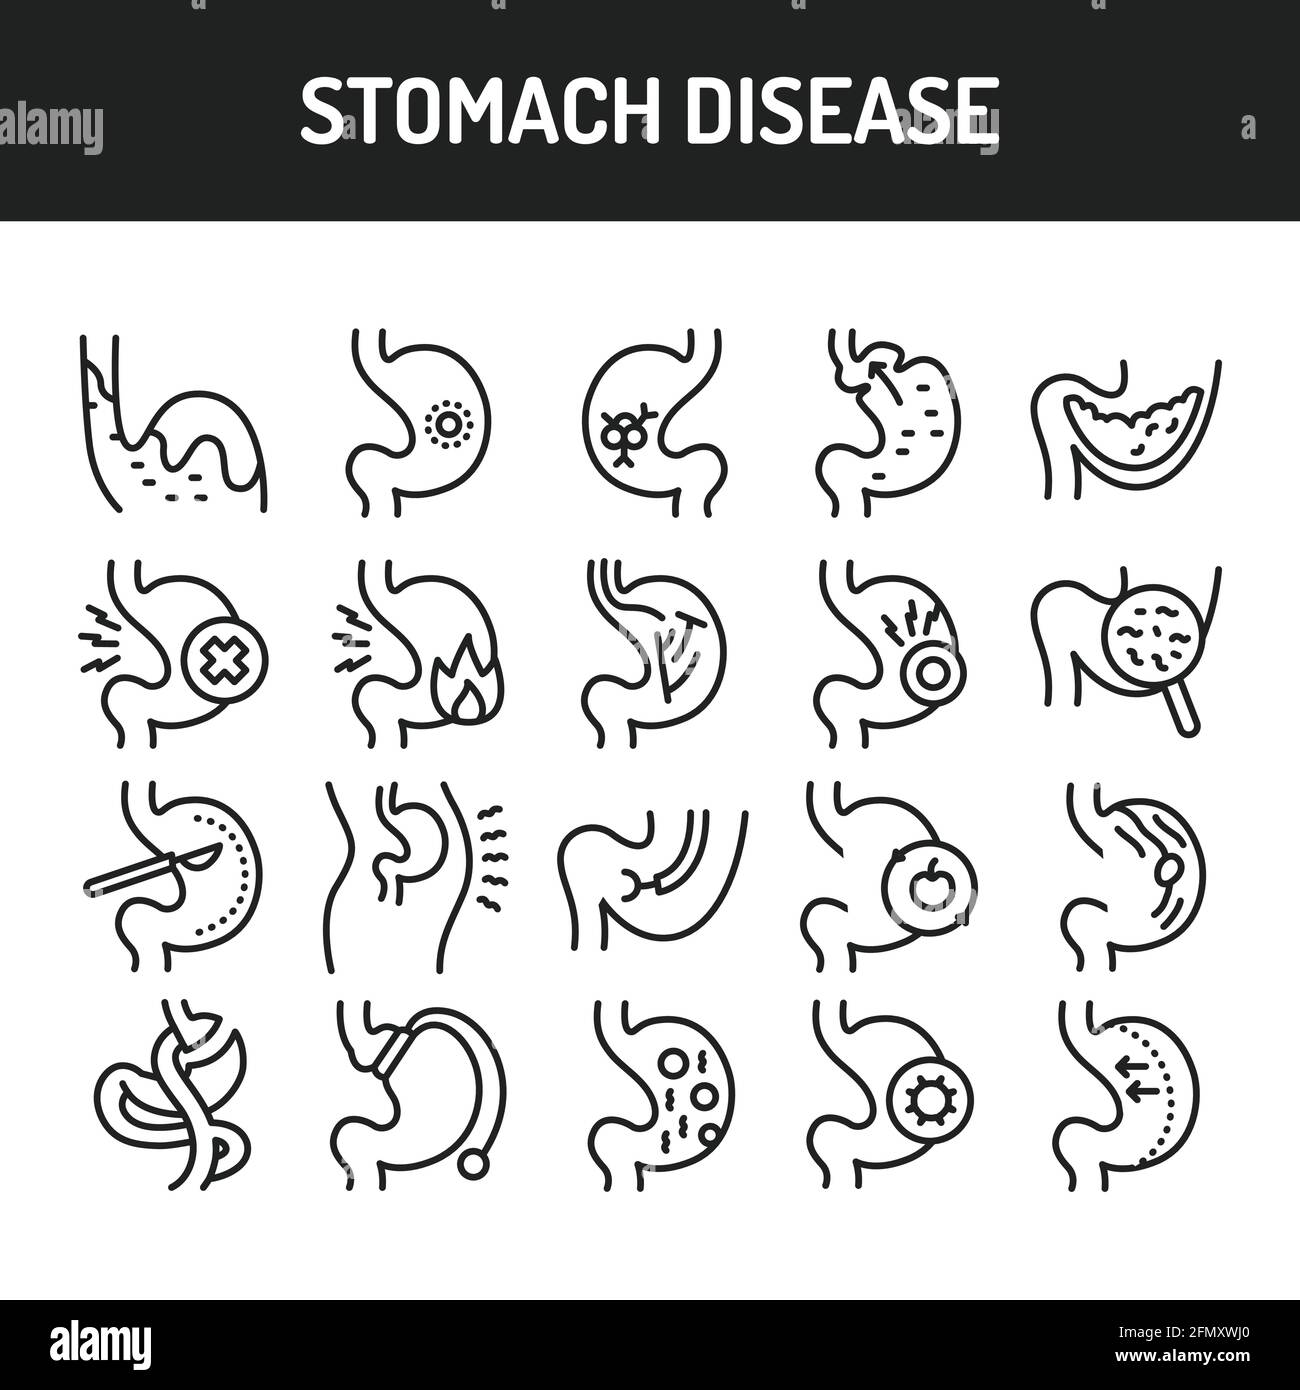 Stomach diseases line icons set. Isolated vector element. Stock Vector